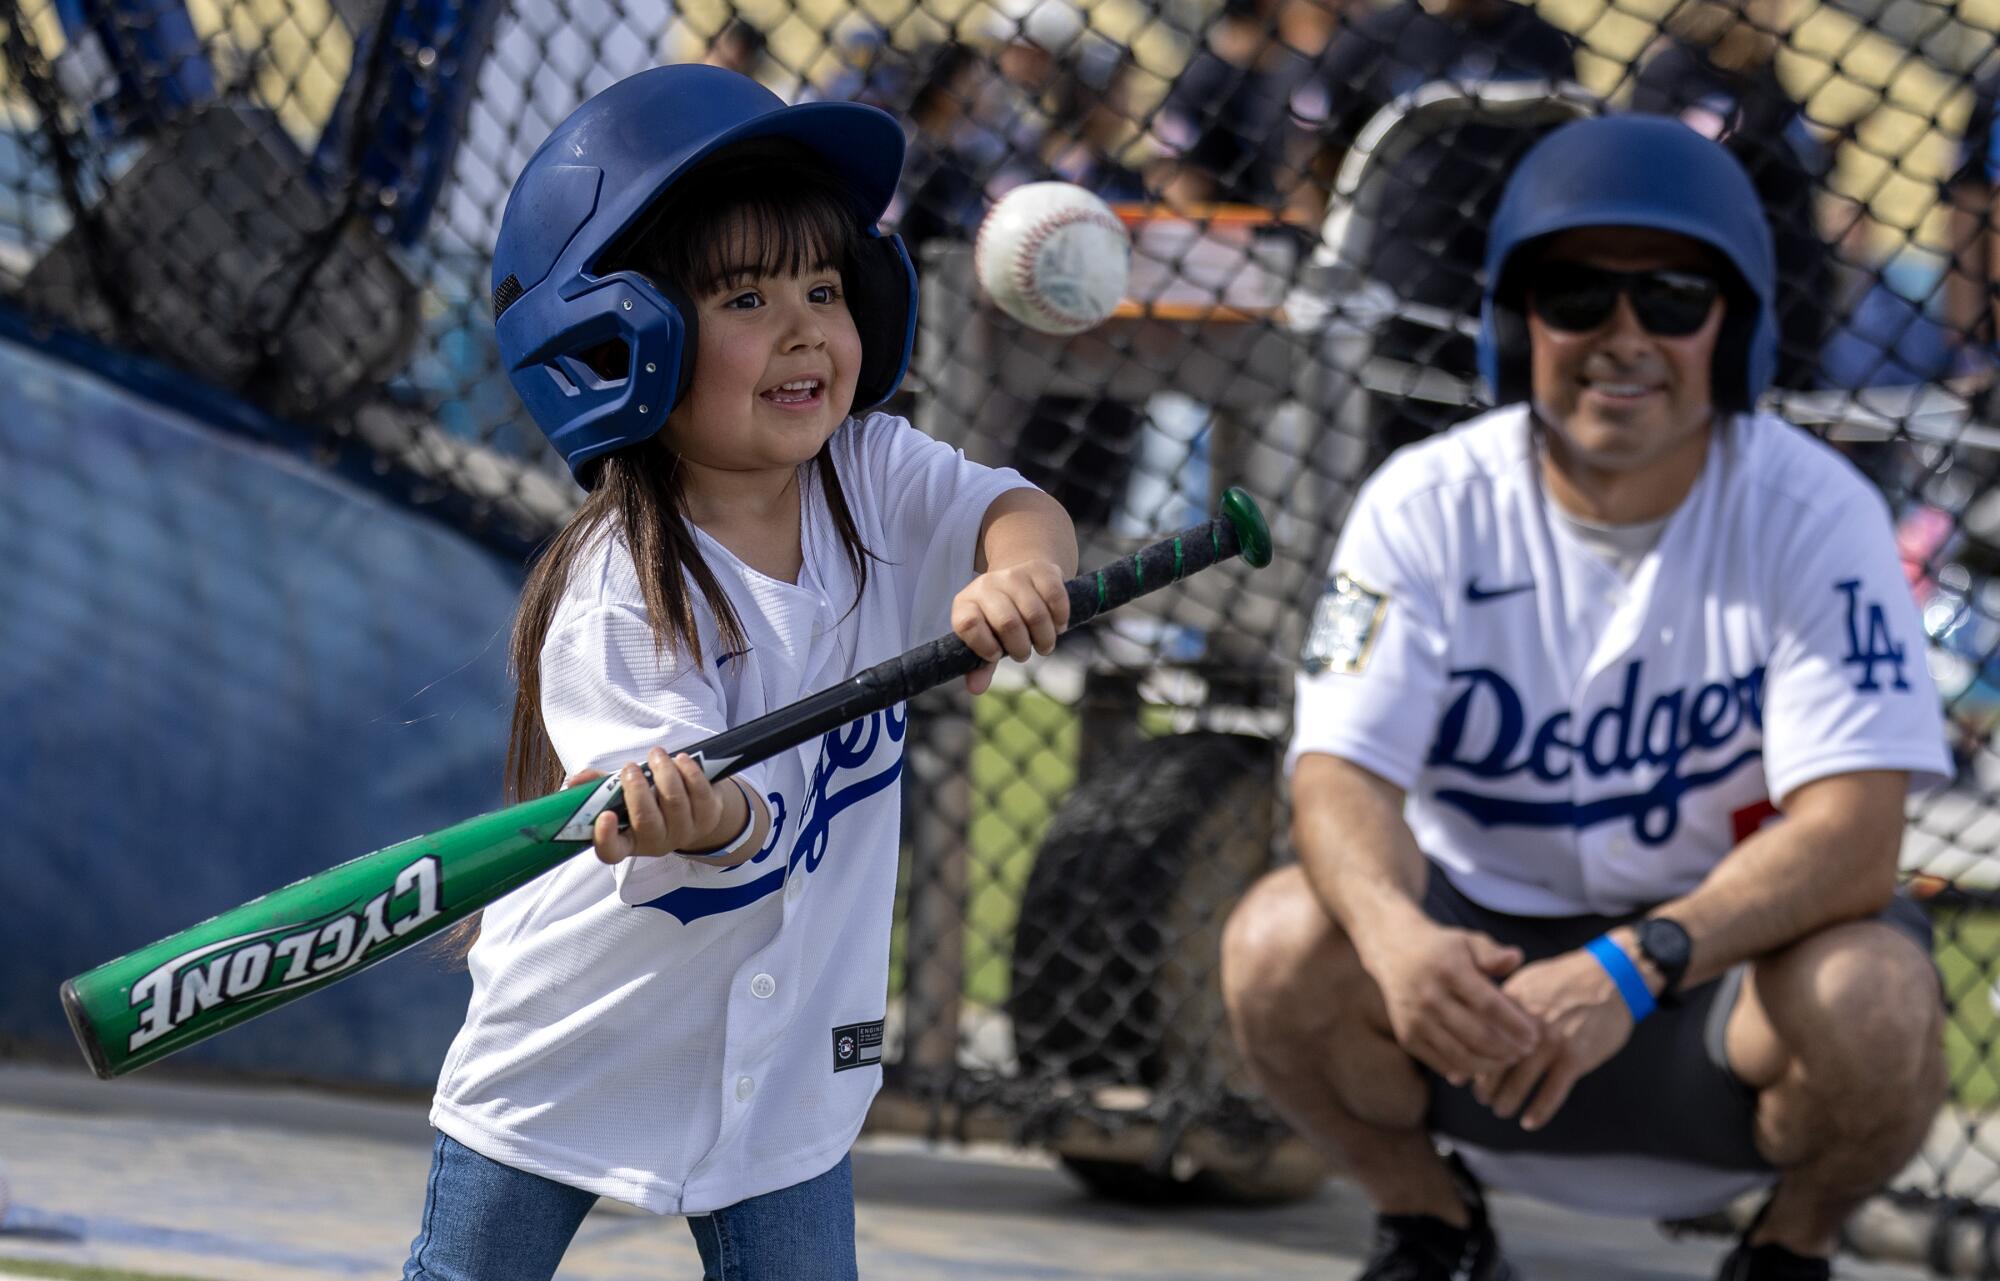 A little girl in a Dodgers shirt holds a baseball bat, ready to swing at an incoming ball as her father watches. 